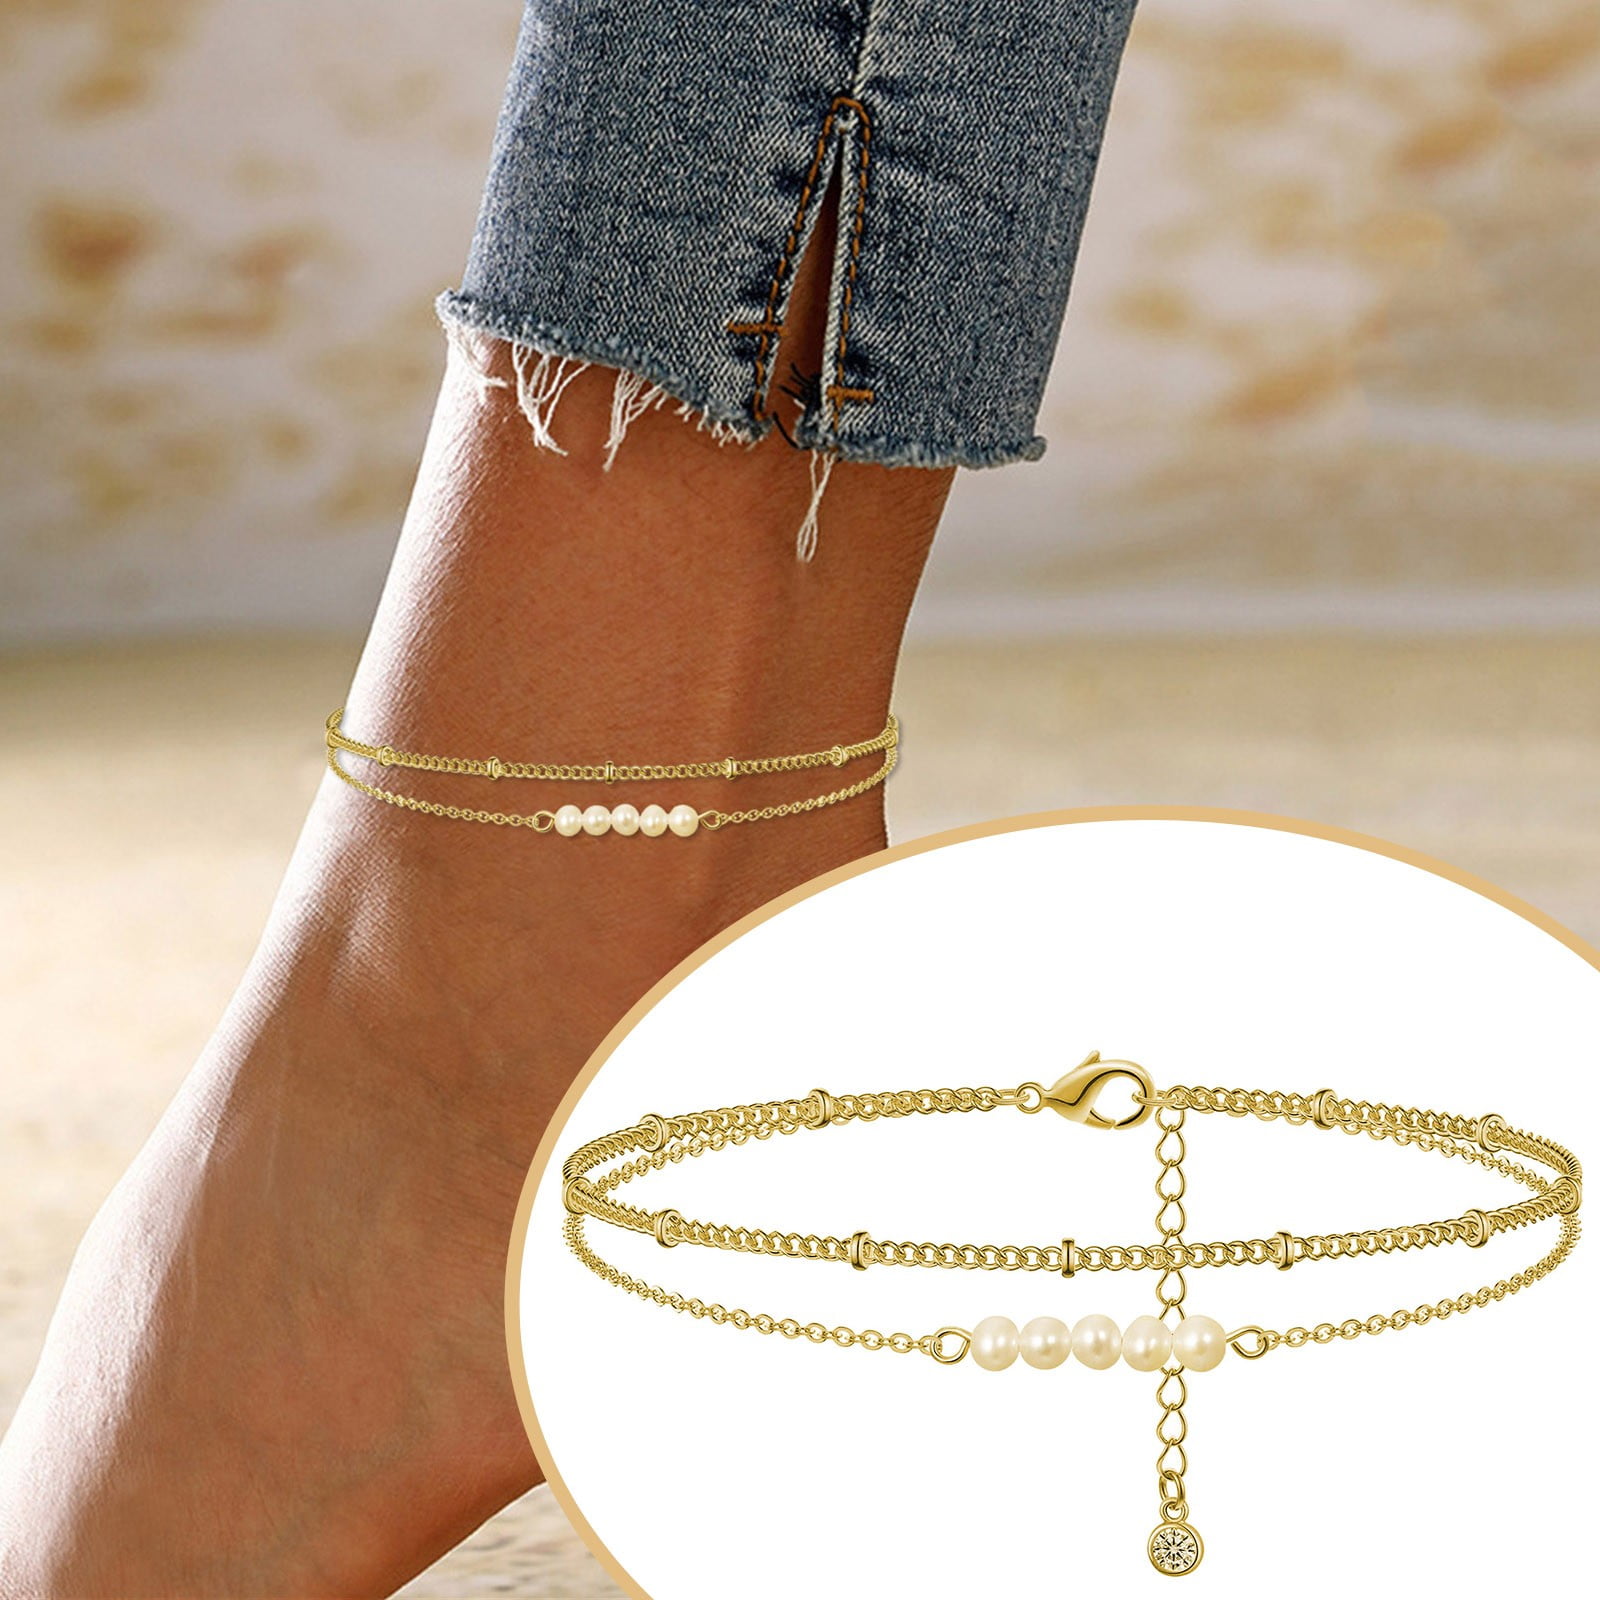 layer anklets anklets gold keusn ankle foot bracelet pearl double beads women pendant beach h boho chains bracelet for